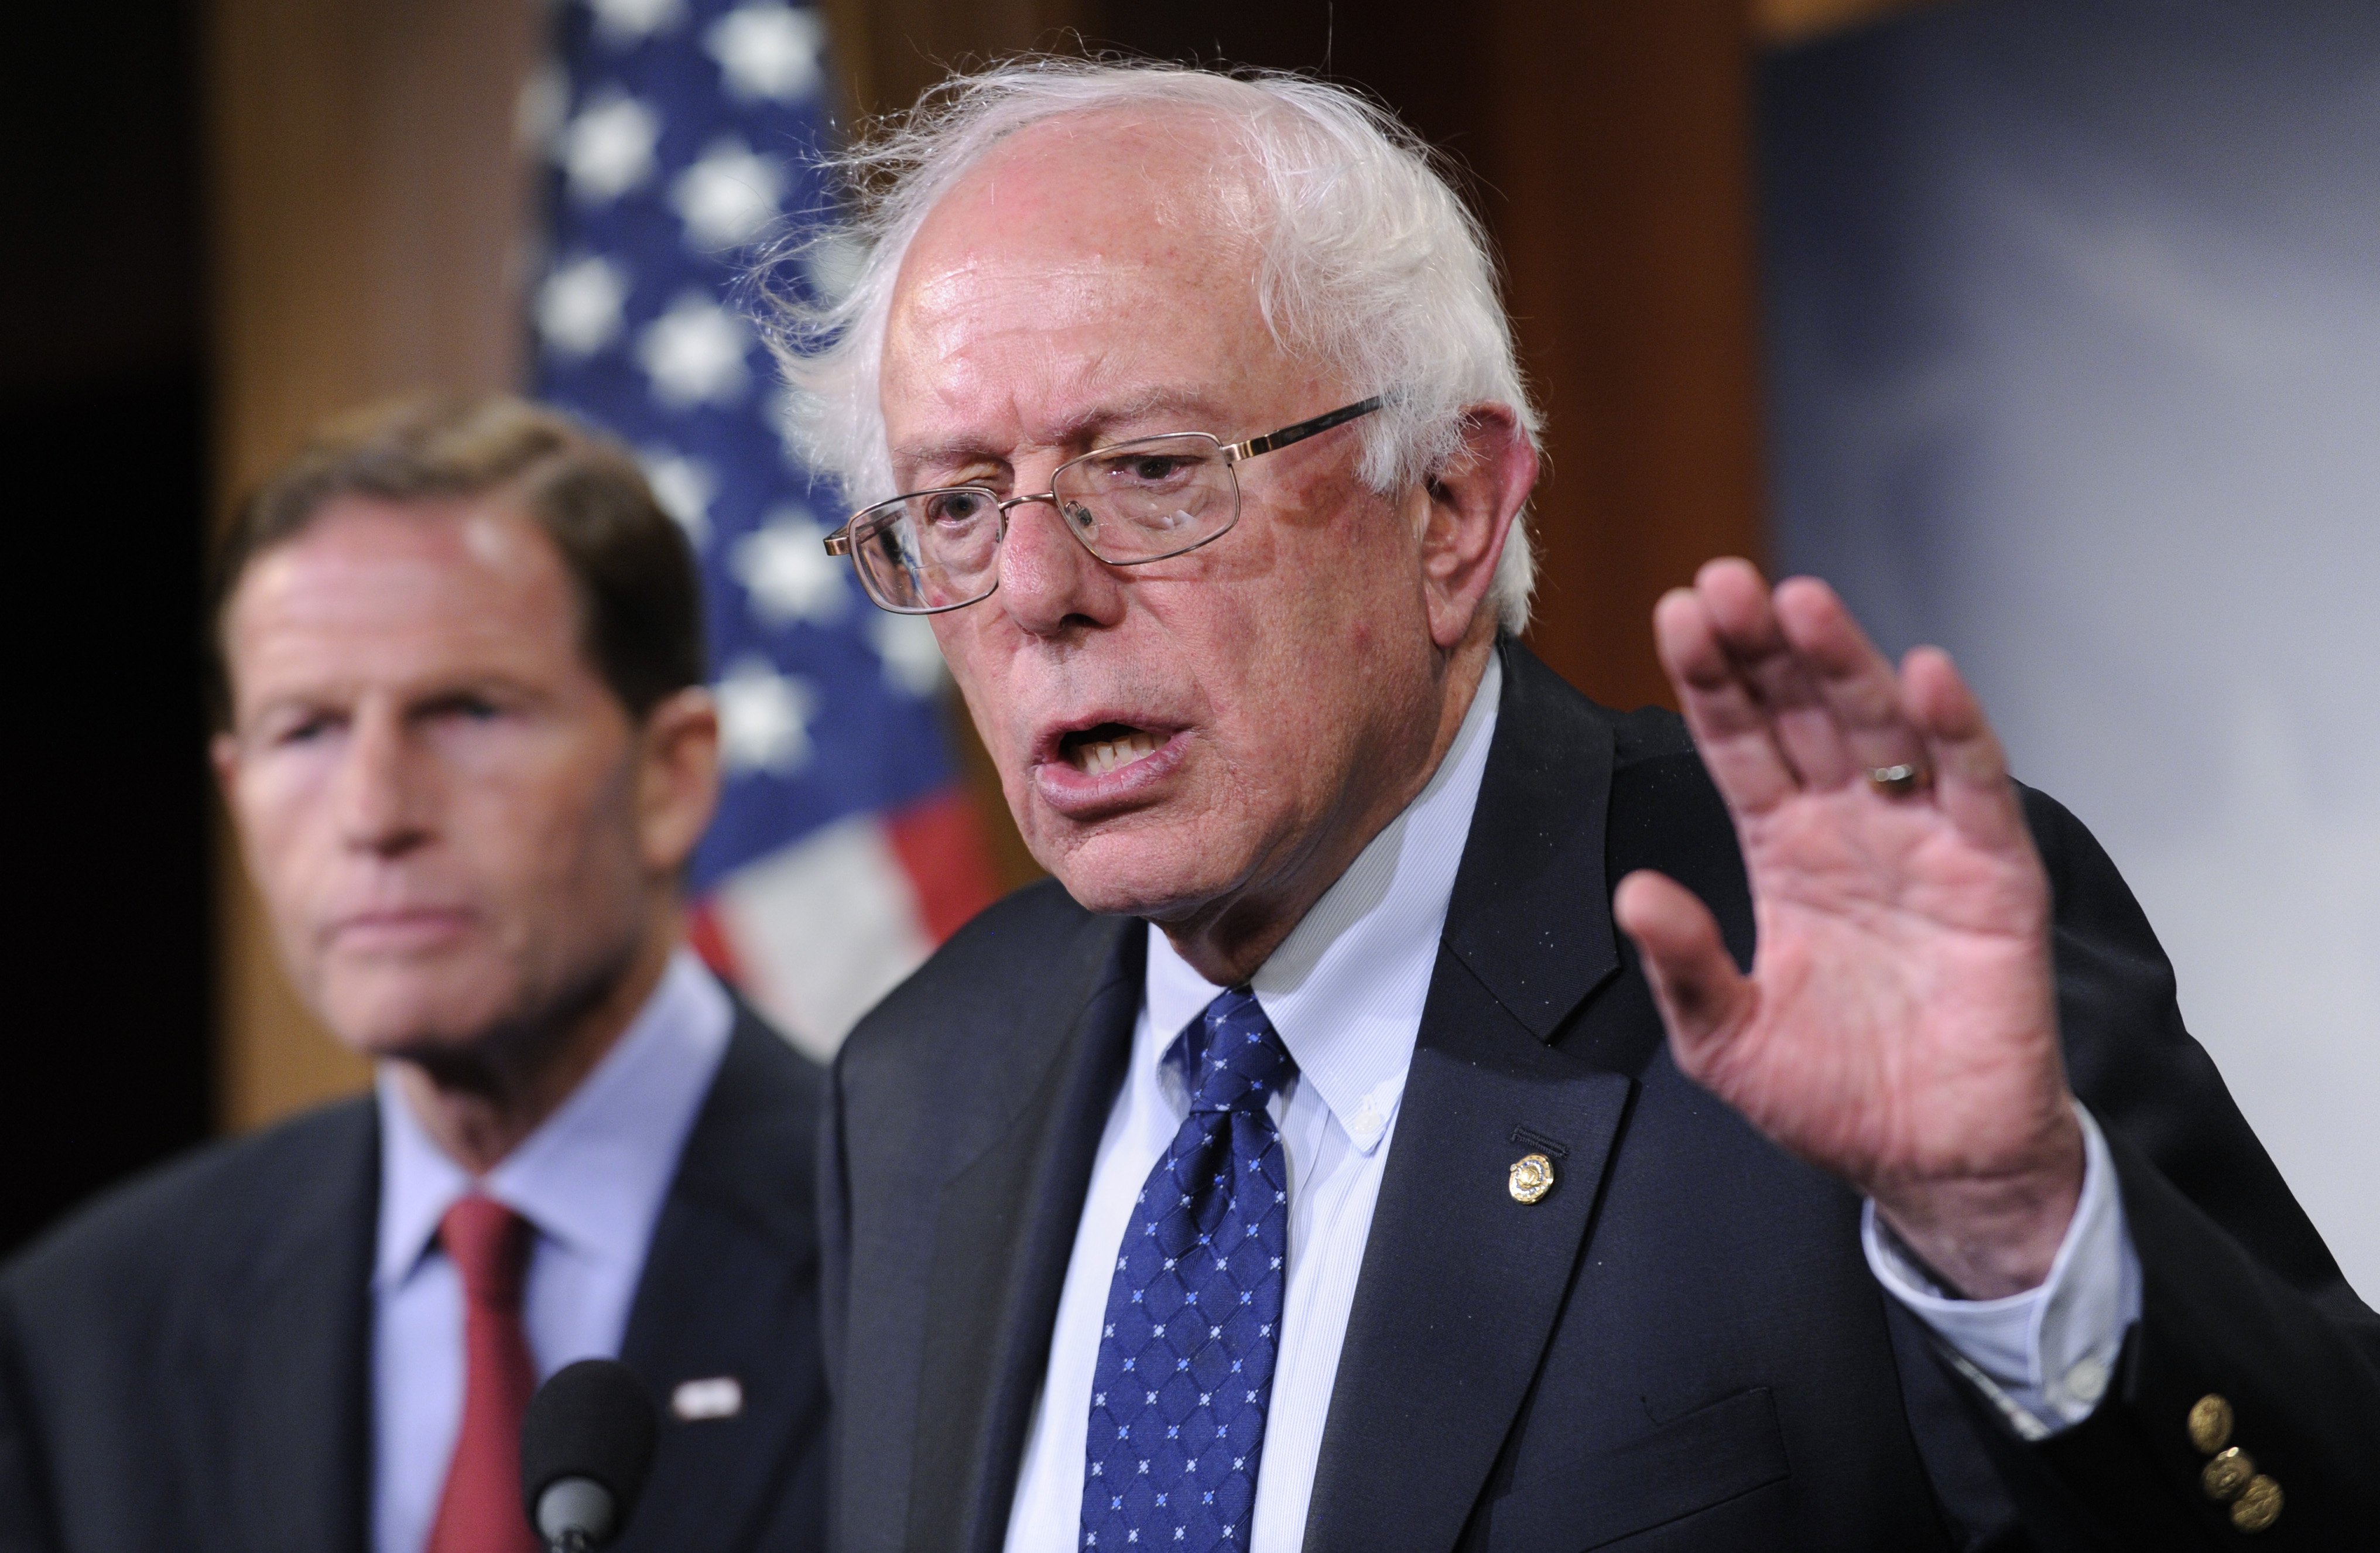 From right: Senator Bernie Sanders and Senator Richard Blumenthal during a news conference on Capitol Hill in Washington, D.C., on July 24, 2014. (AP)